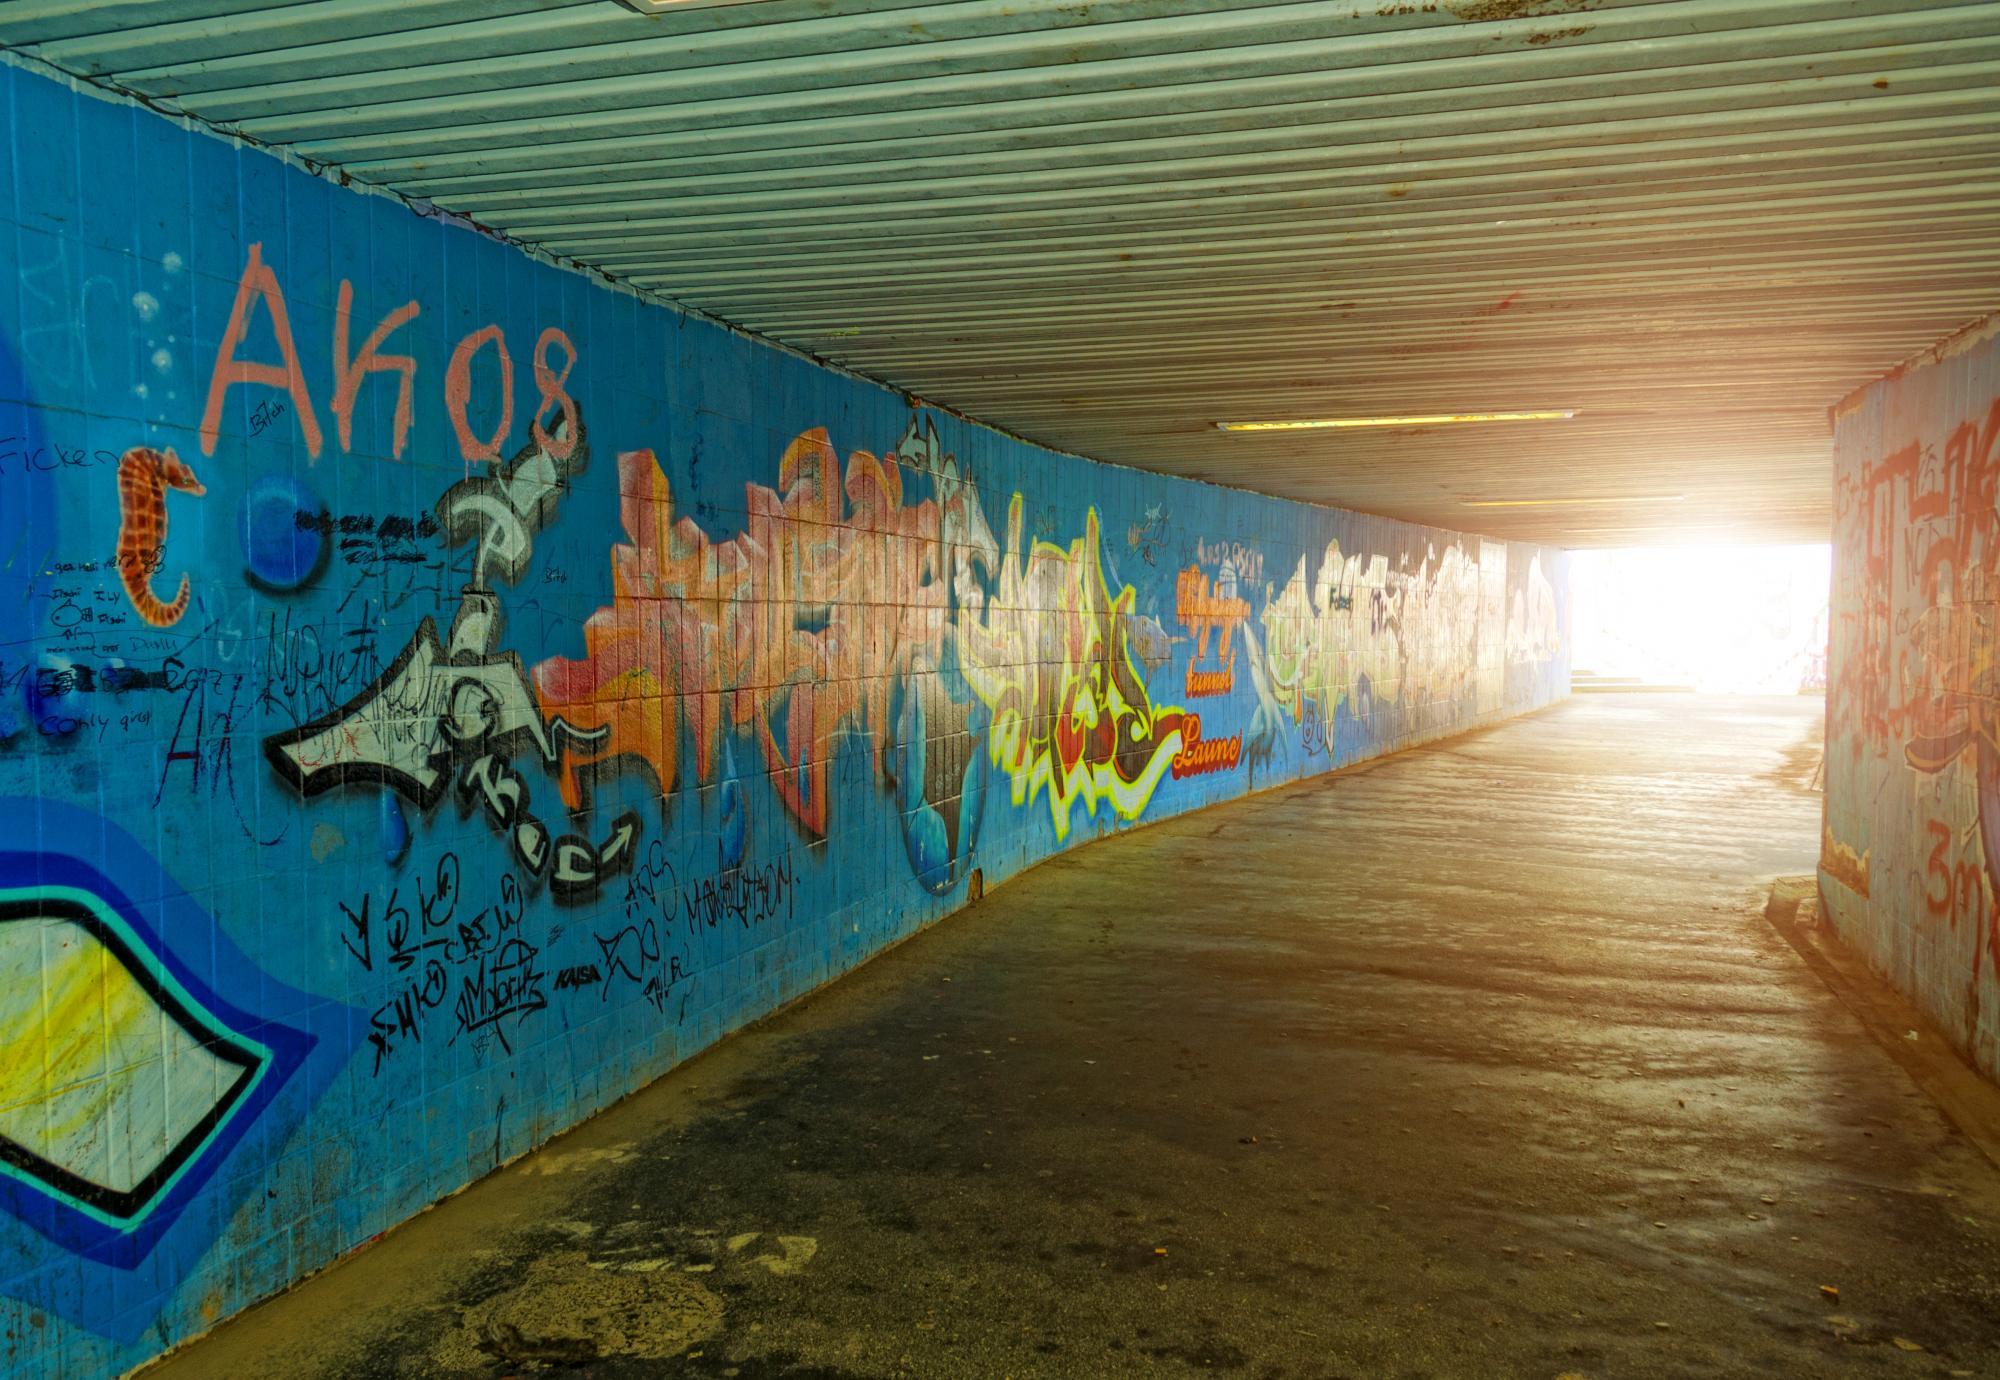 Graffiti on a wall, and example of ASB